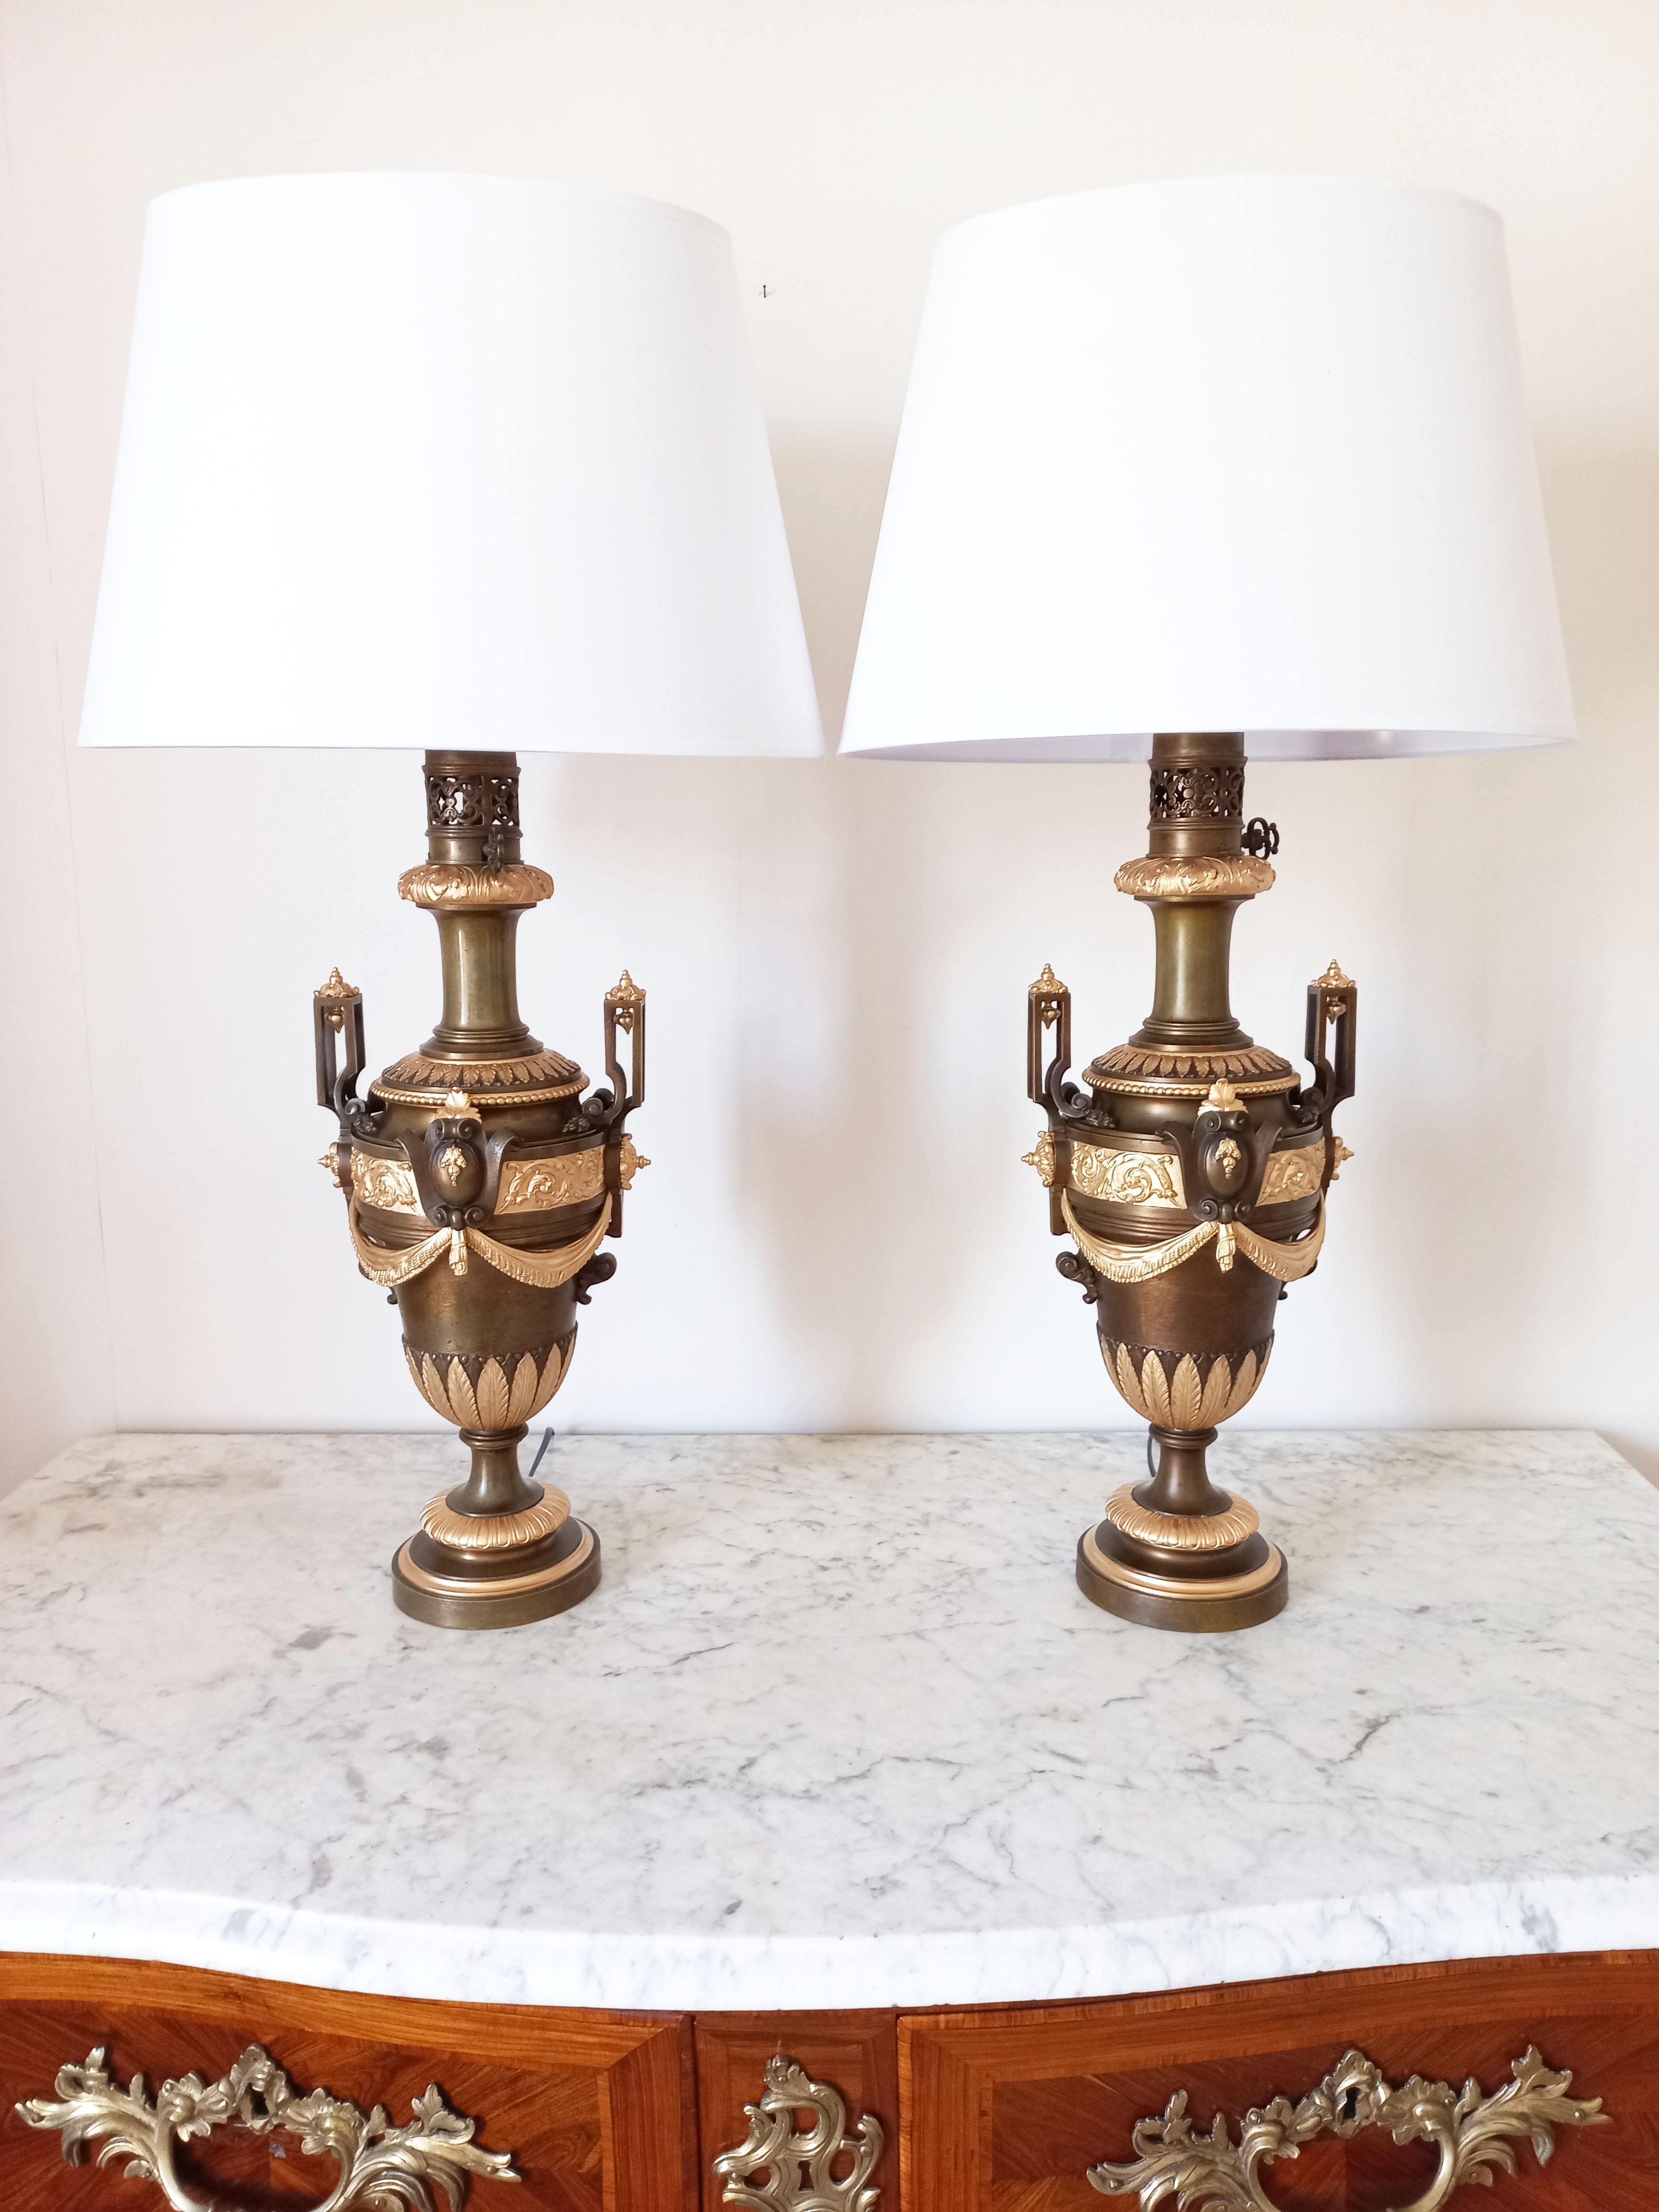 Pair of Antique style lamps in patinated and gilded bronze. Richly decorated with golden motifs. France, late 19th century period. Electrification redone, several lights will be provided. They are in very good condition, and spectacular.
the